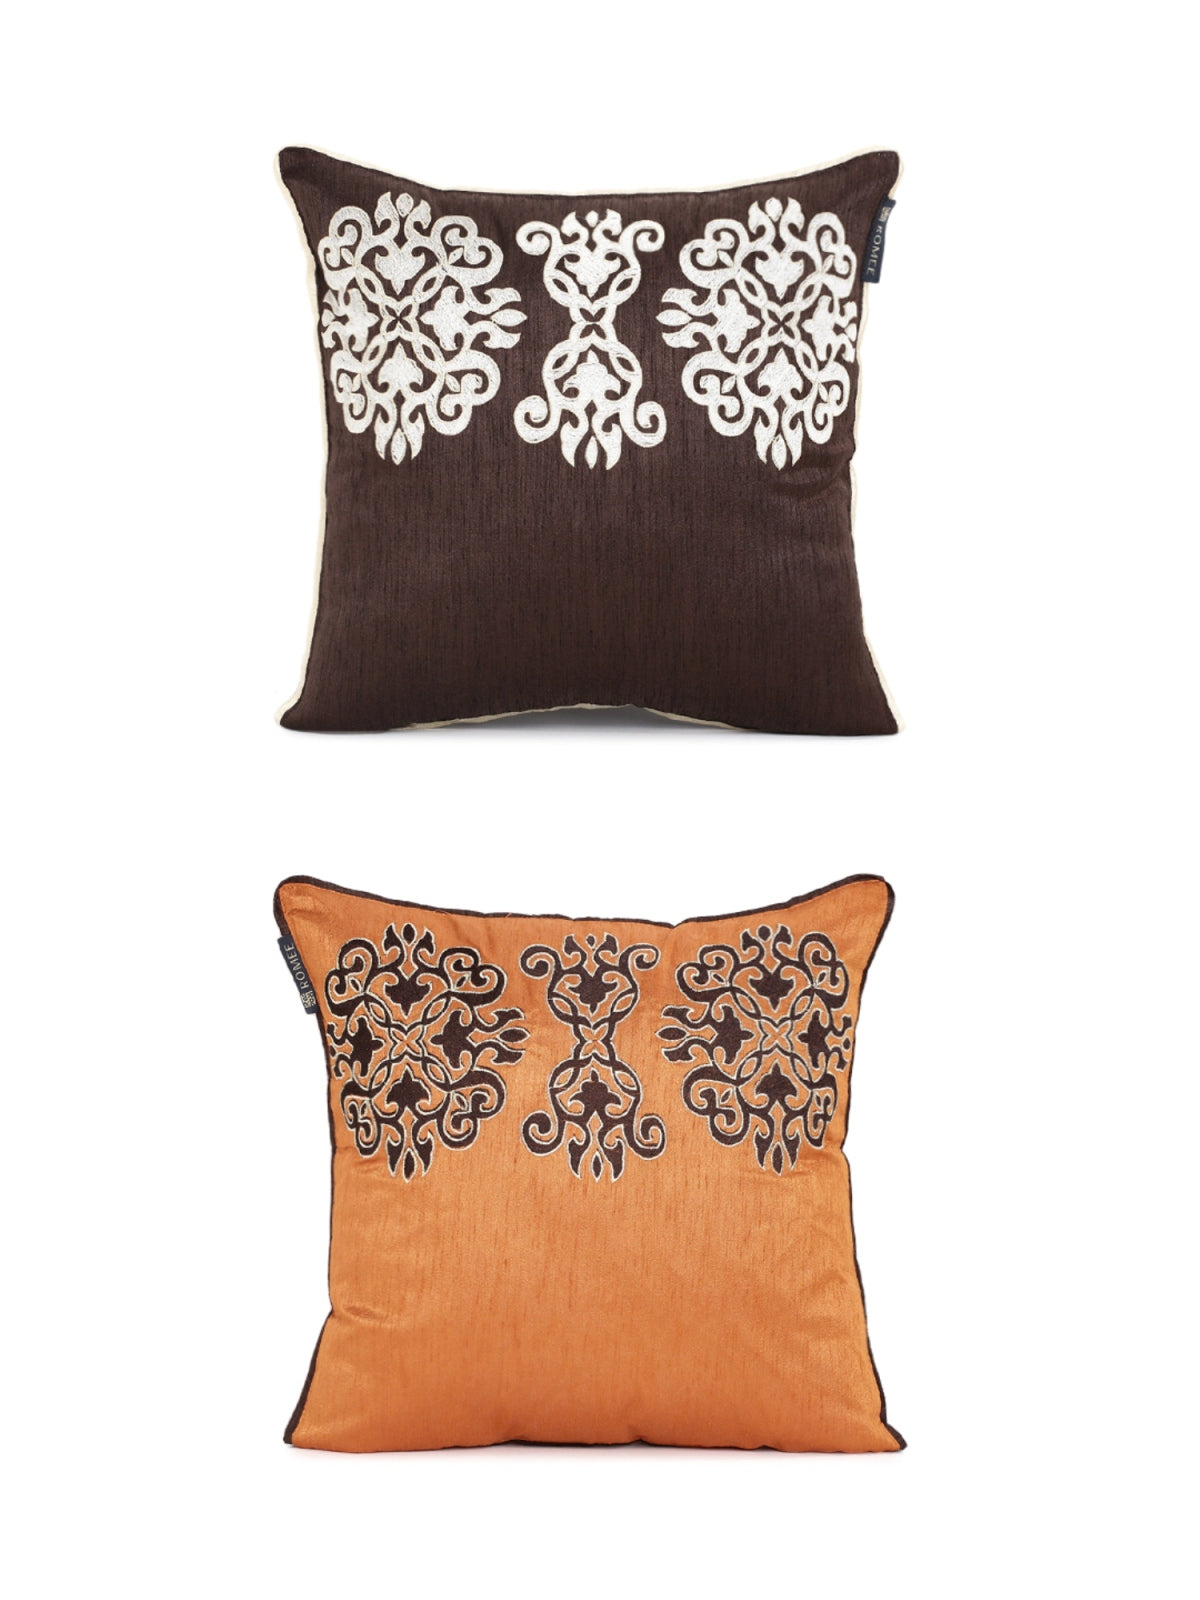 Embroidered 2 Piece Polyester Cushion Cover Set - 16" x 16", Orange and Brown